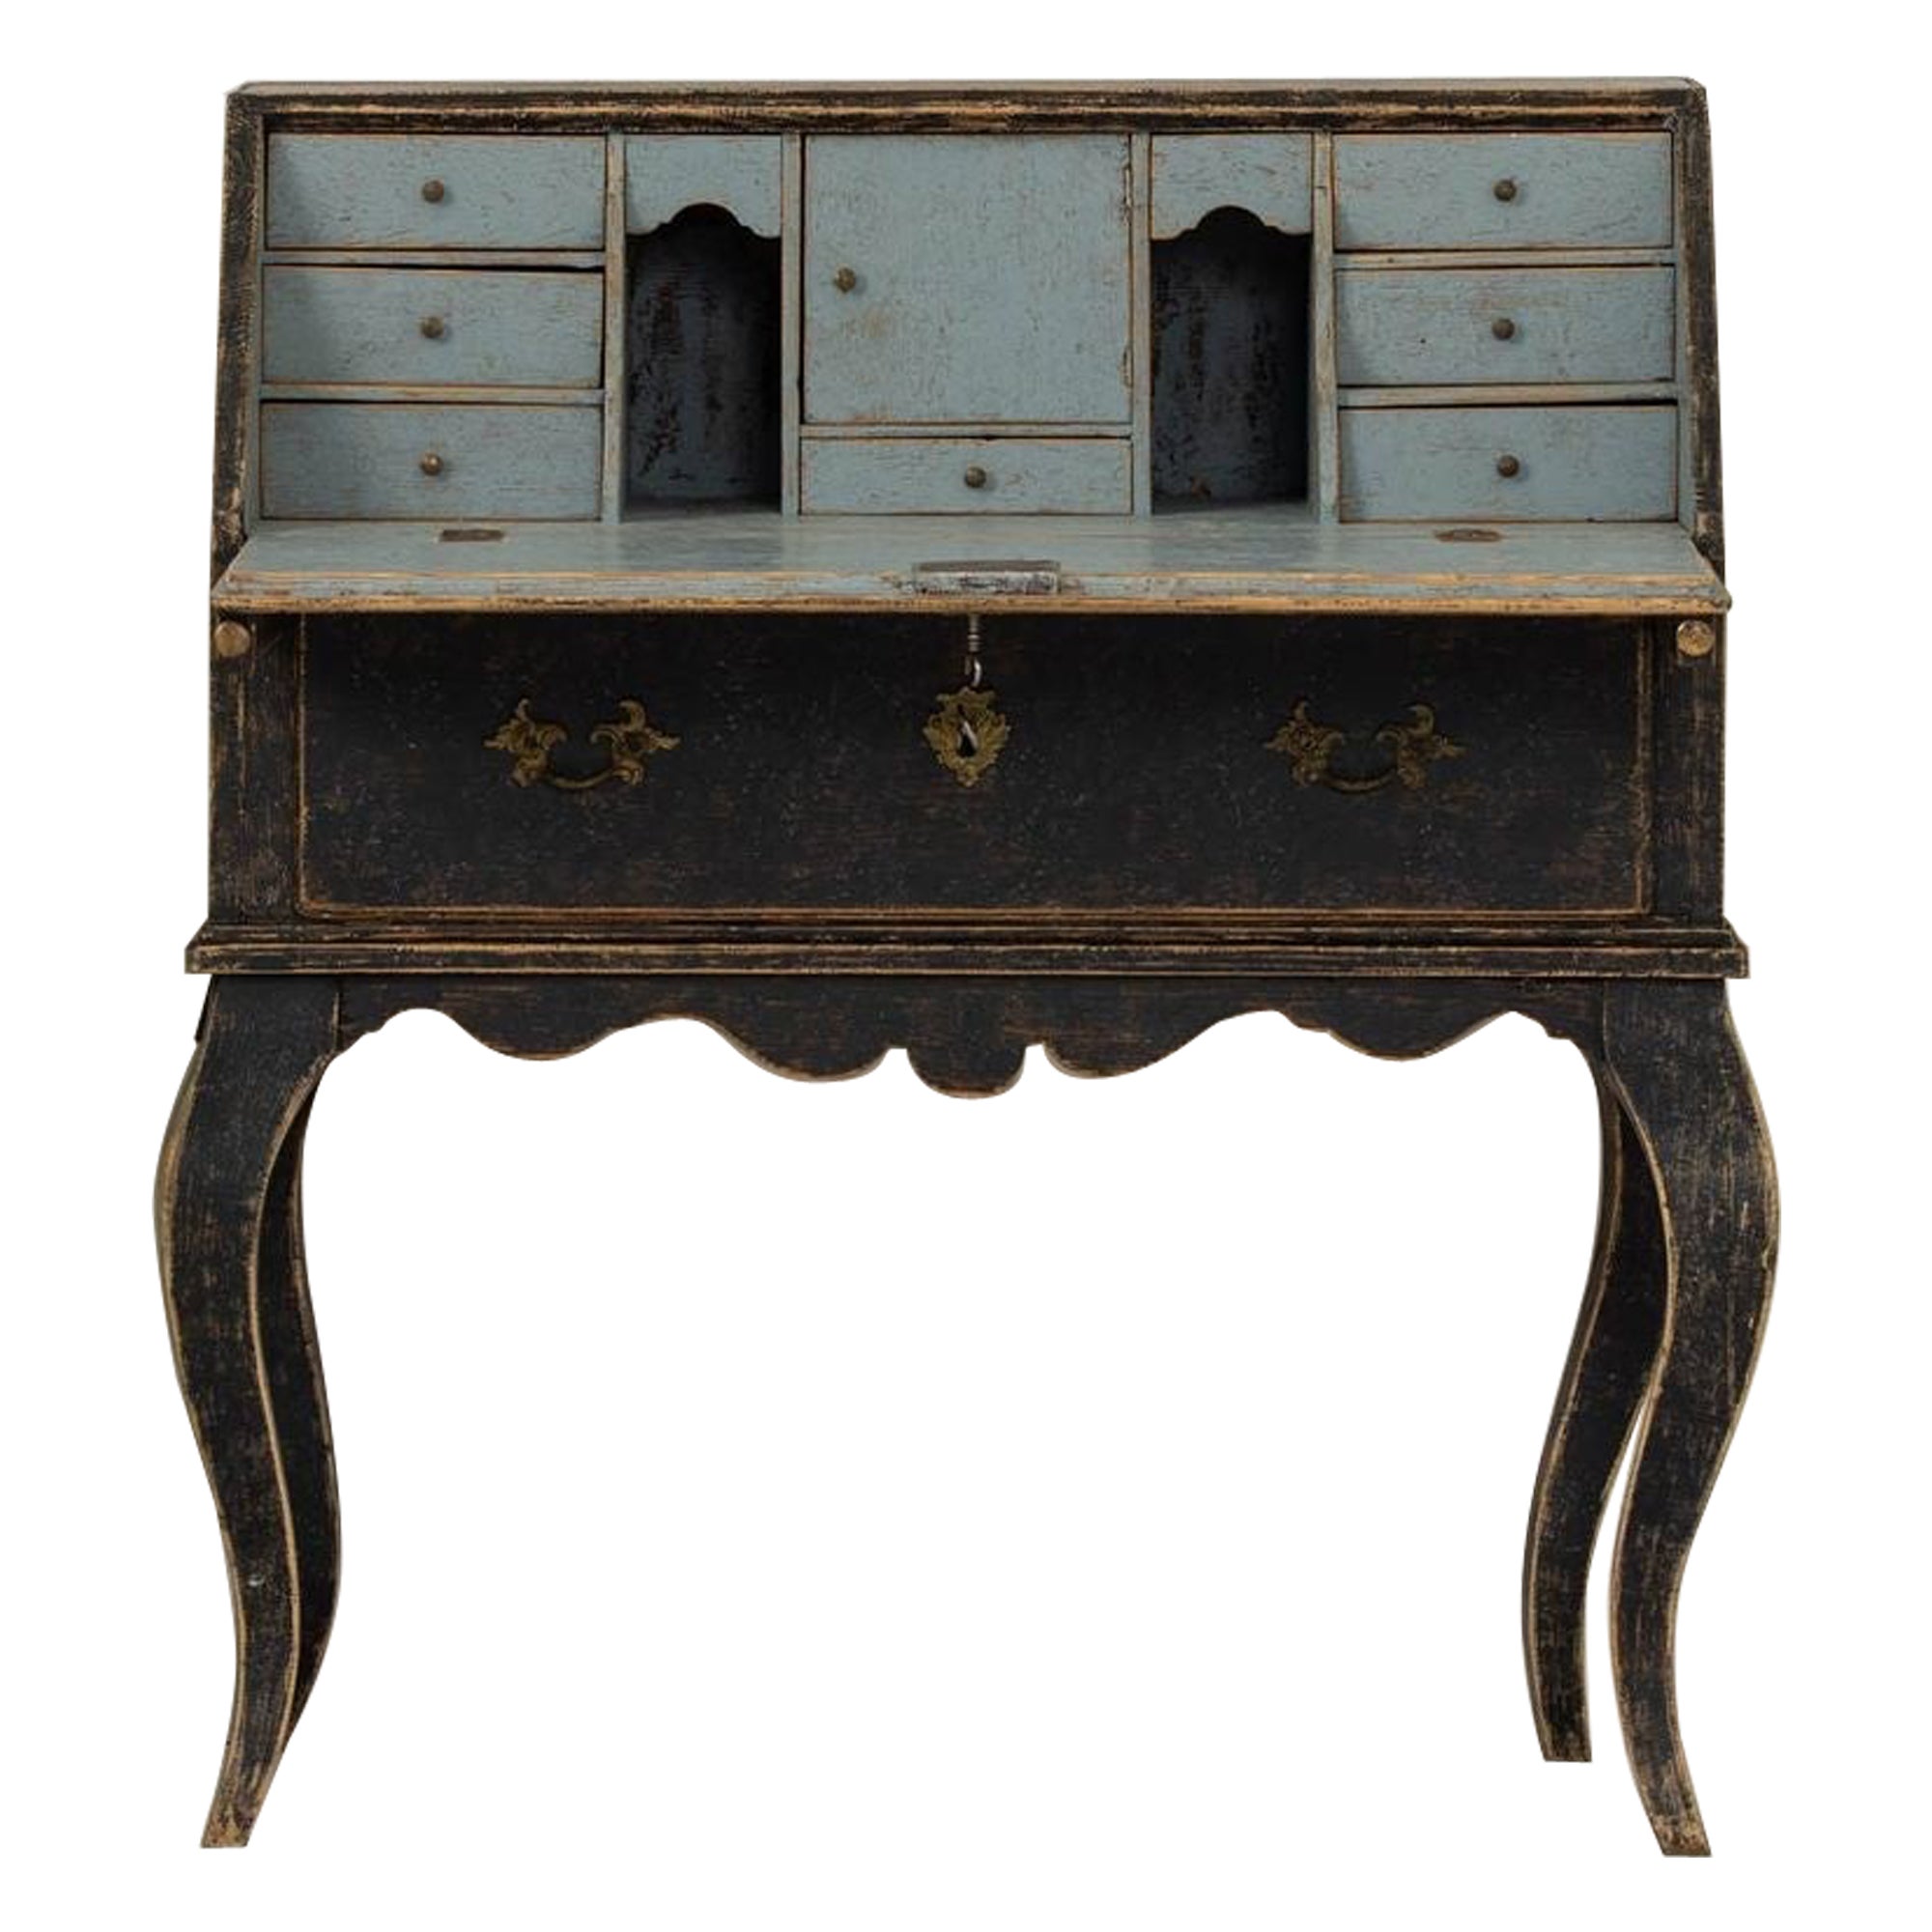 19th c. Swedish Rococo Painted Fall Front Desk For Sale